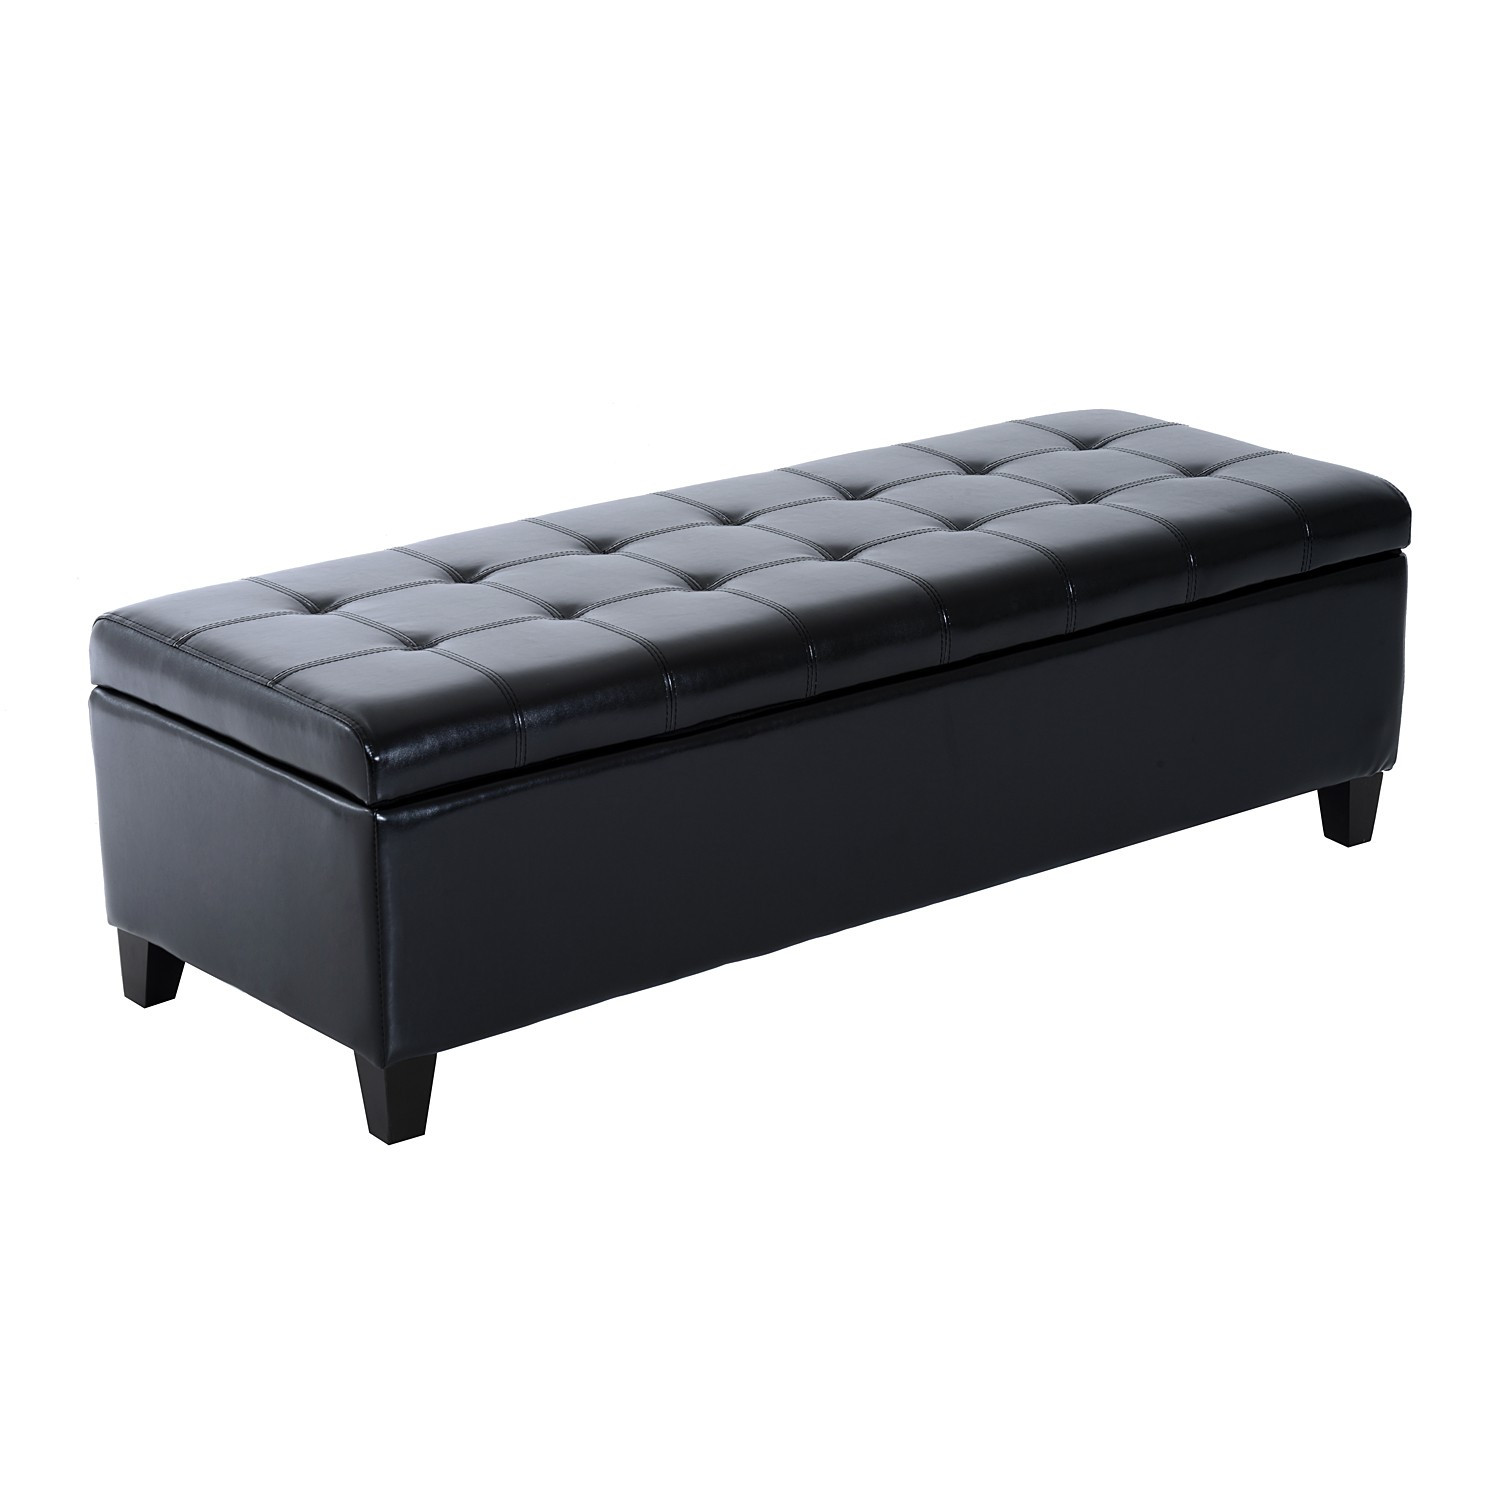 Black Tufted Storage Bench
 Hom 51” Tufted Faux Leather Ottoman Storage Bench